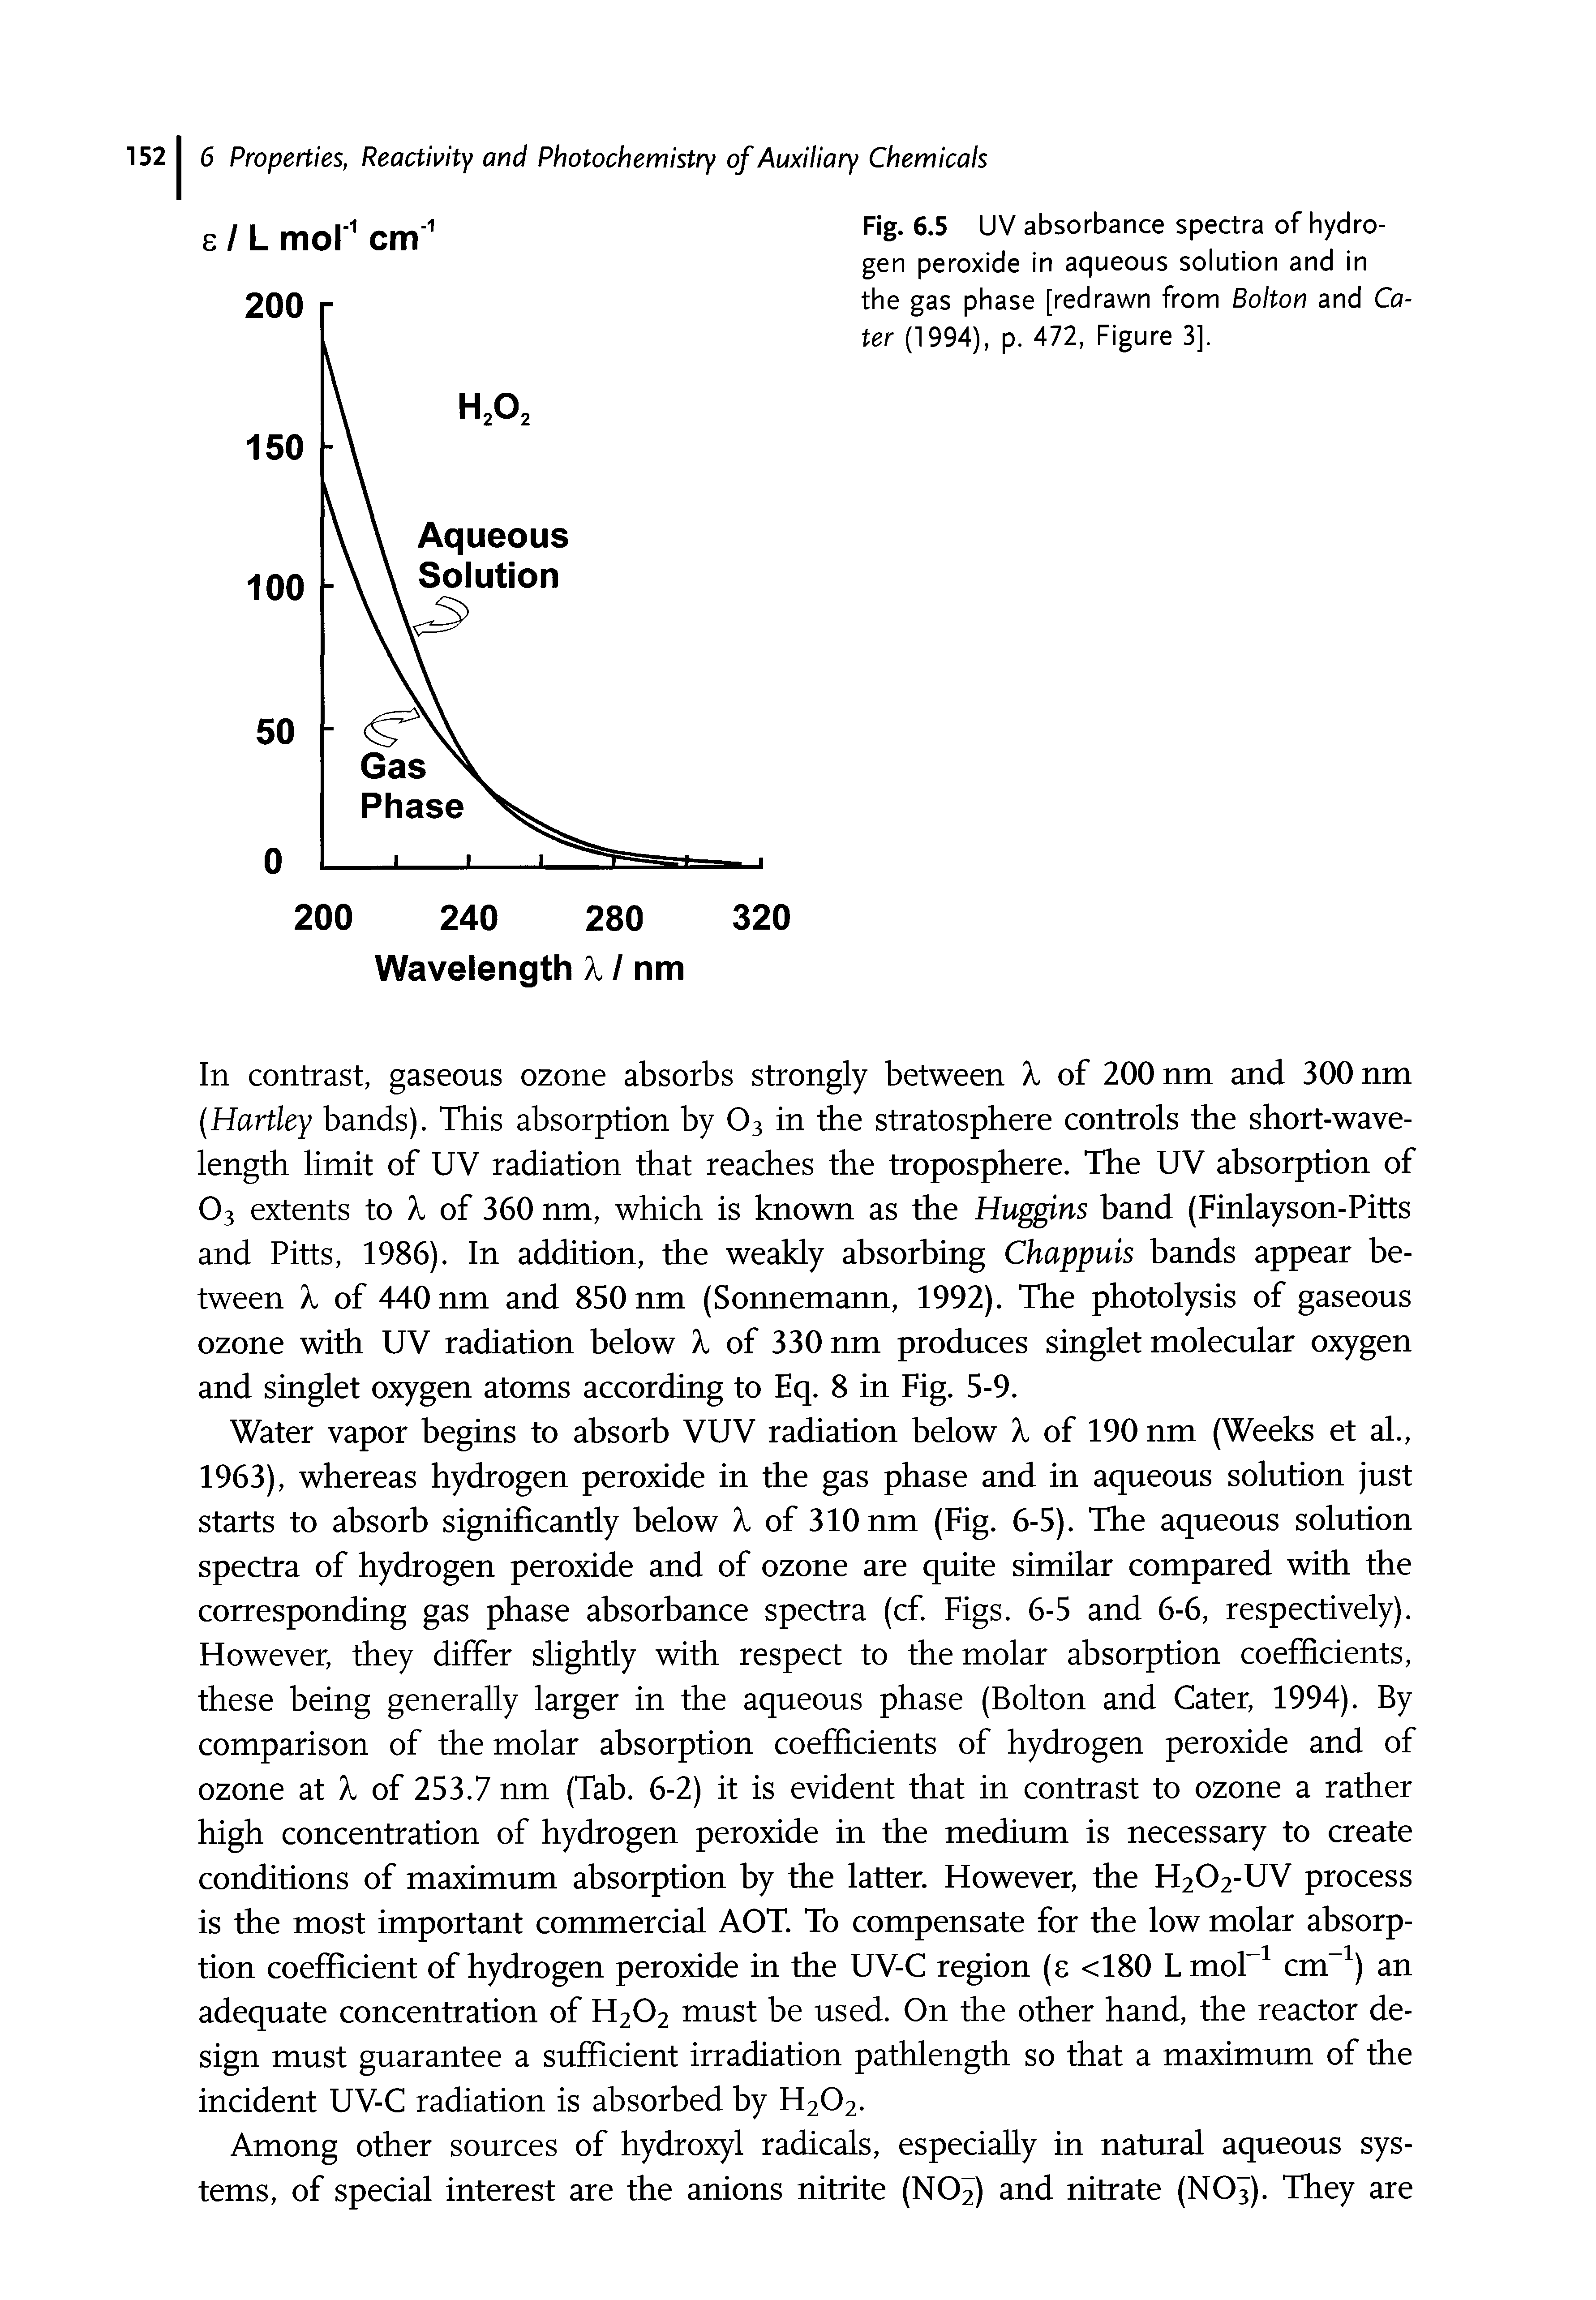 Fig. 6.5 UV absorbance spectra of hydrogen peroxide in aqueous solution and in the gas phase [redrawn from Bolton and Cater (1994), p. 472, Figure 3].